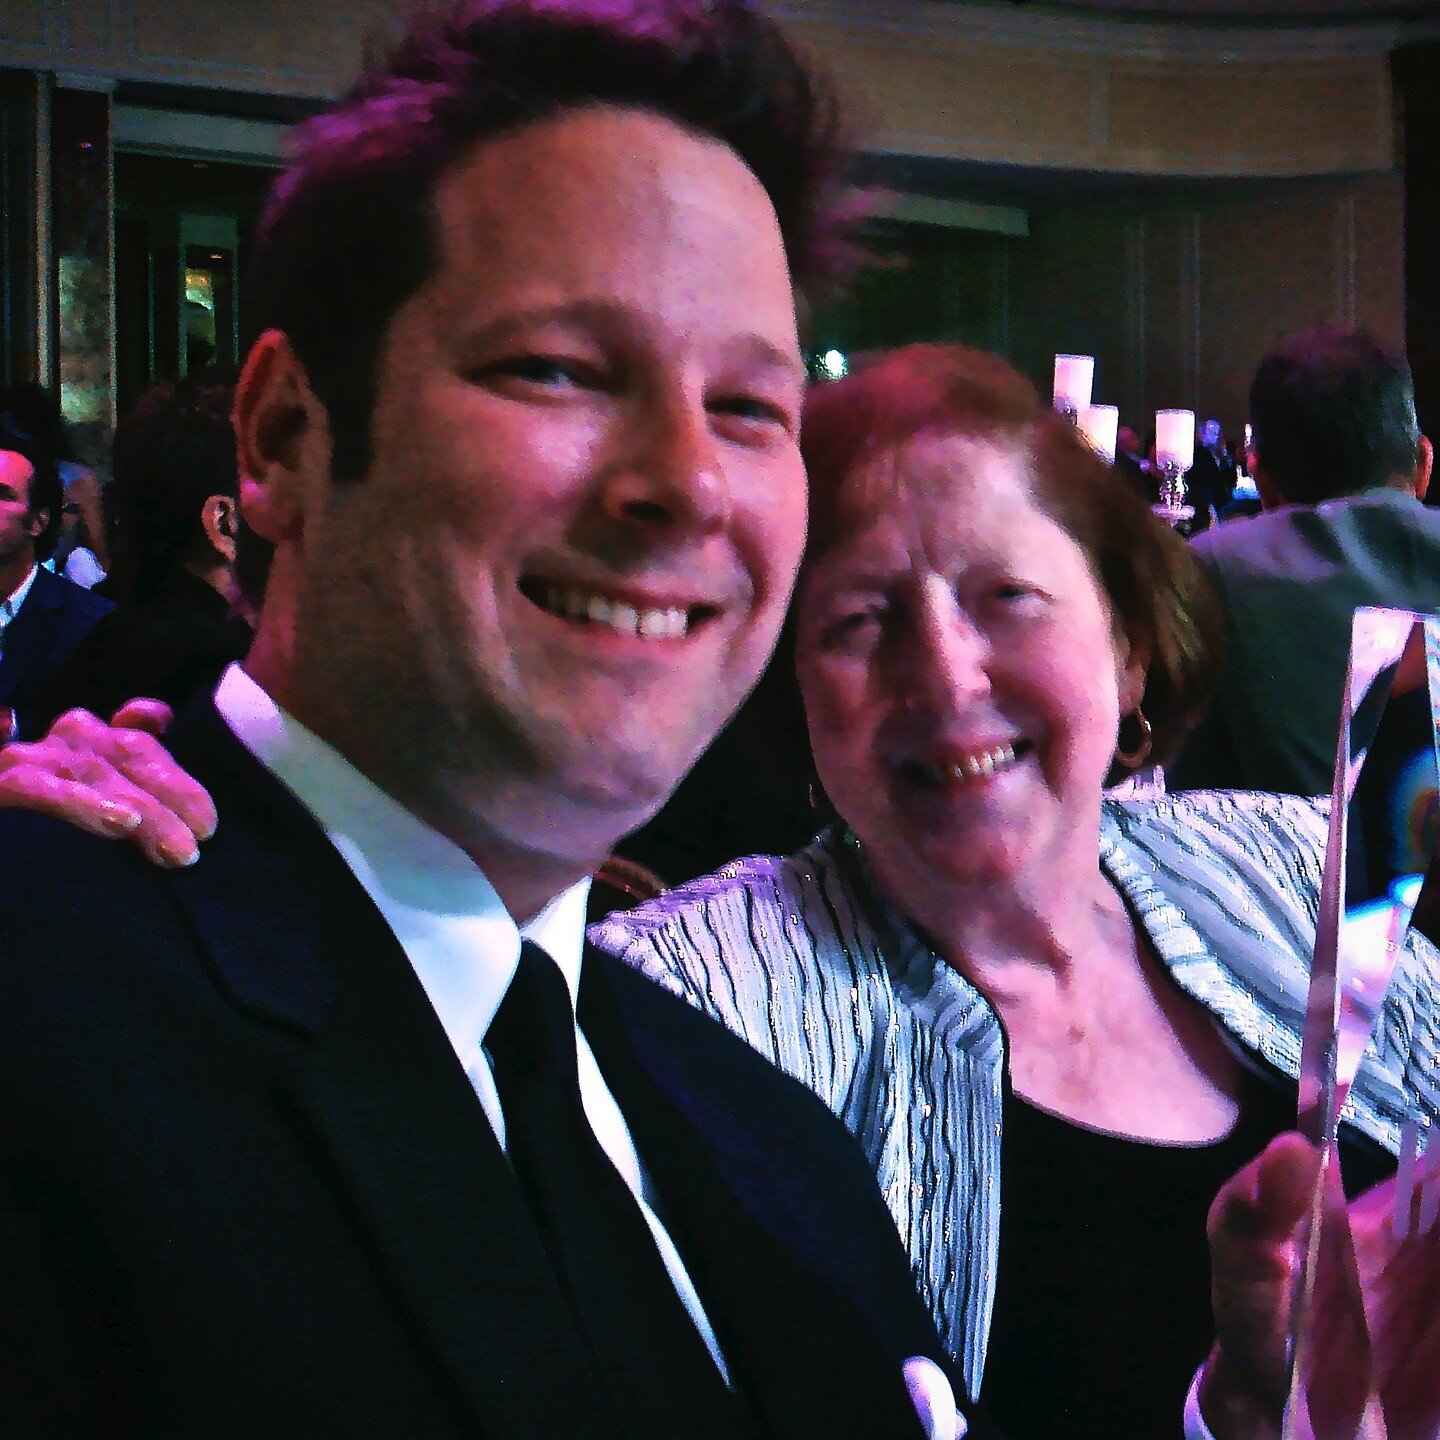 Throwback Thursday on what would have been Mom's 90th birthday. This one's from the 2009 BMI Film &amp; TV Awards.